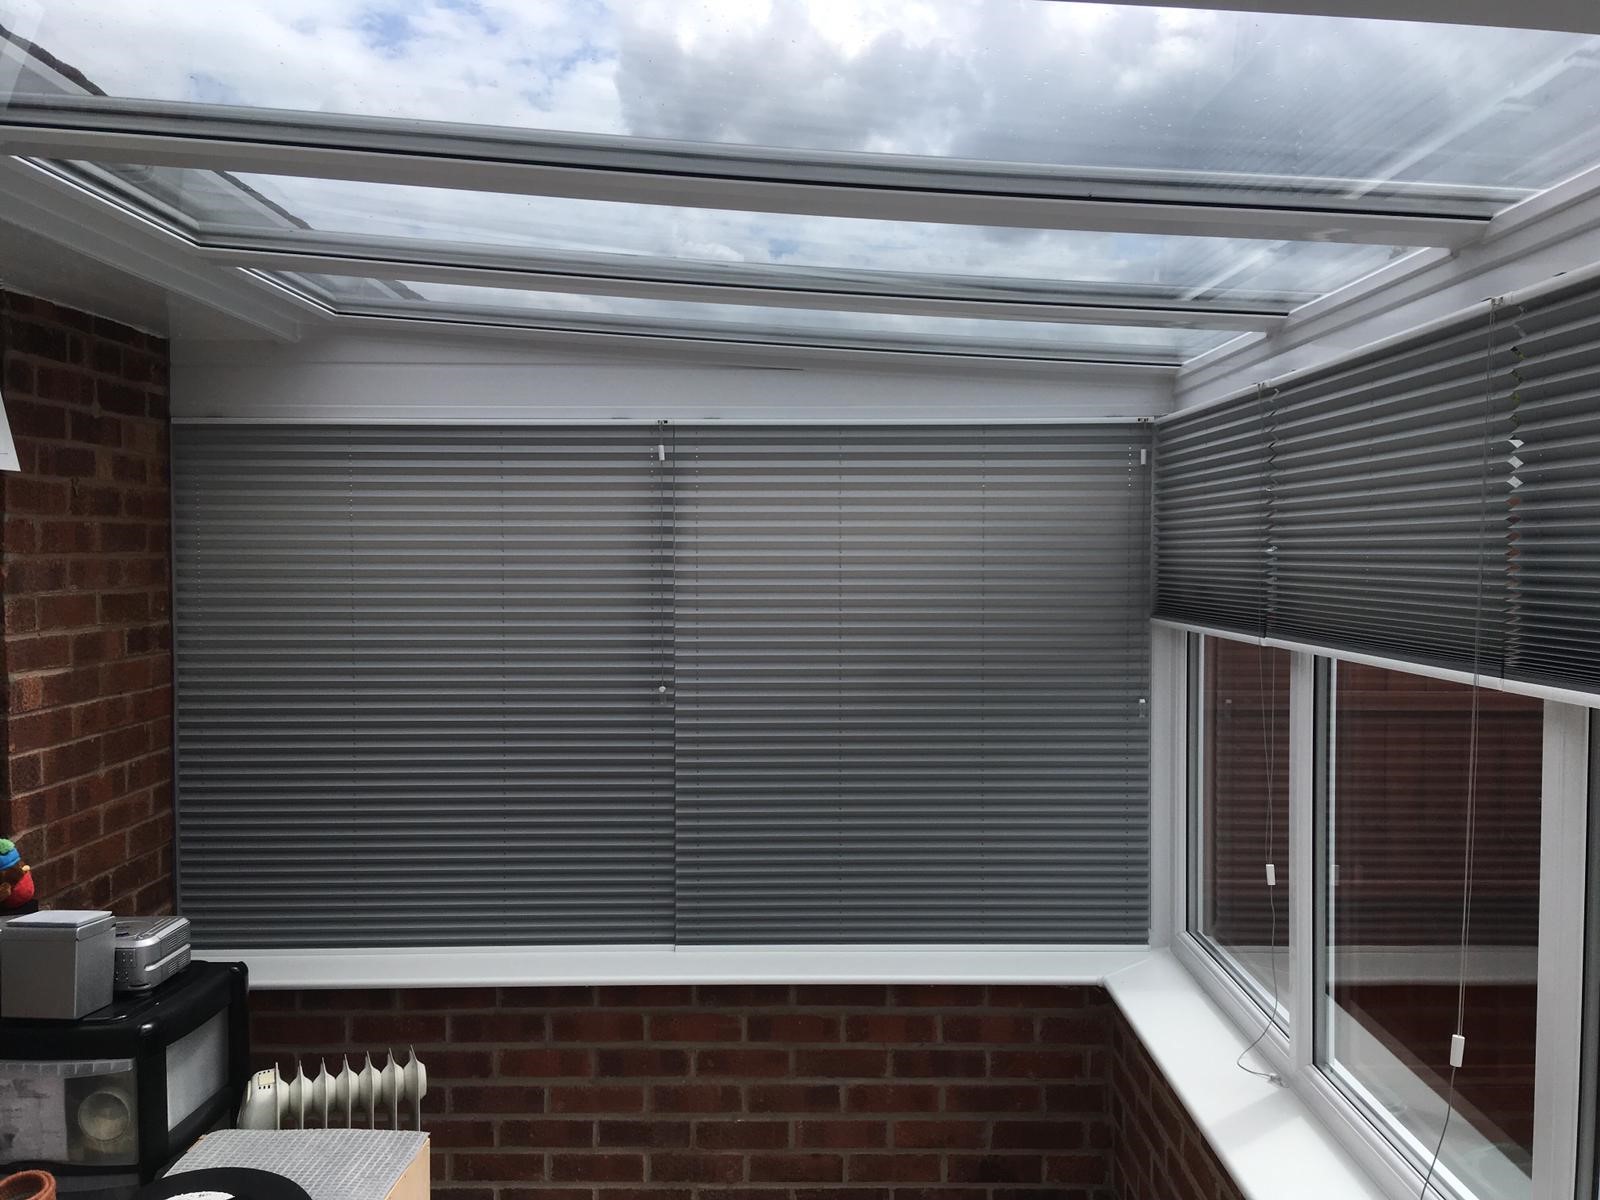 UK Suppliers of Pleated Blinds For Hot Summers